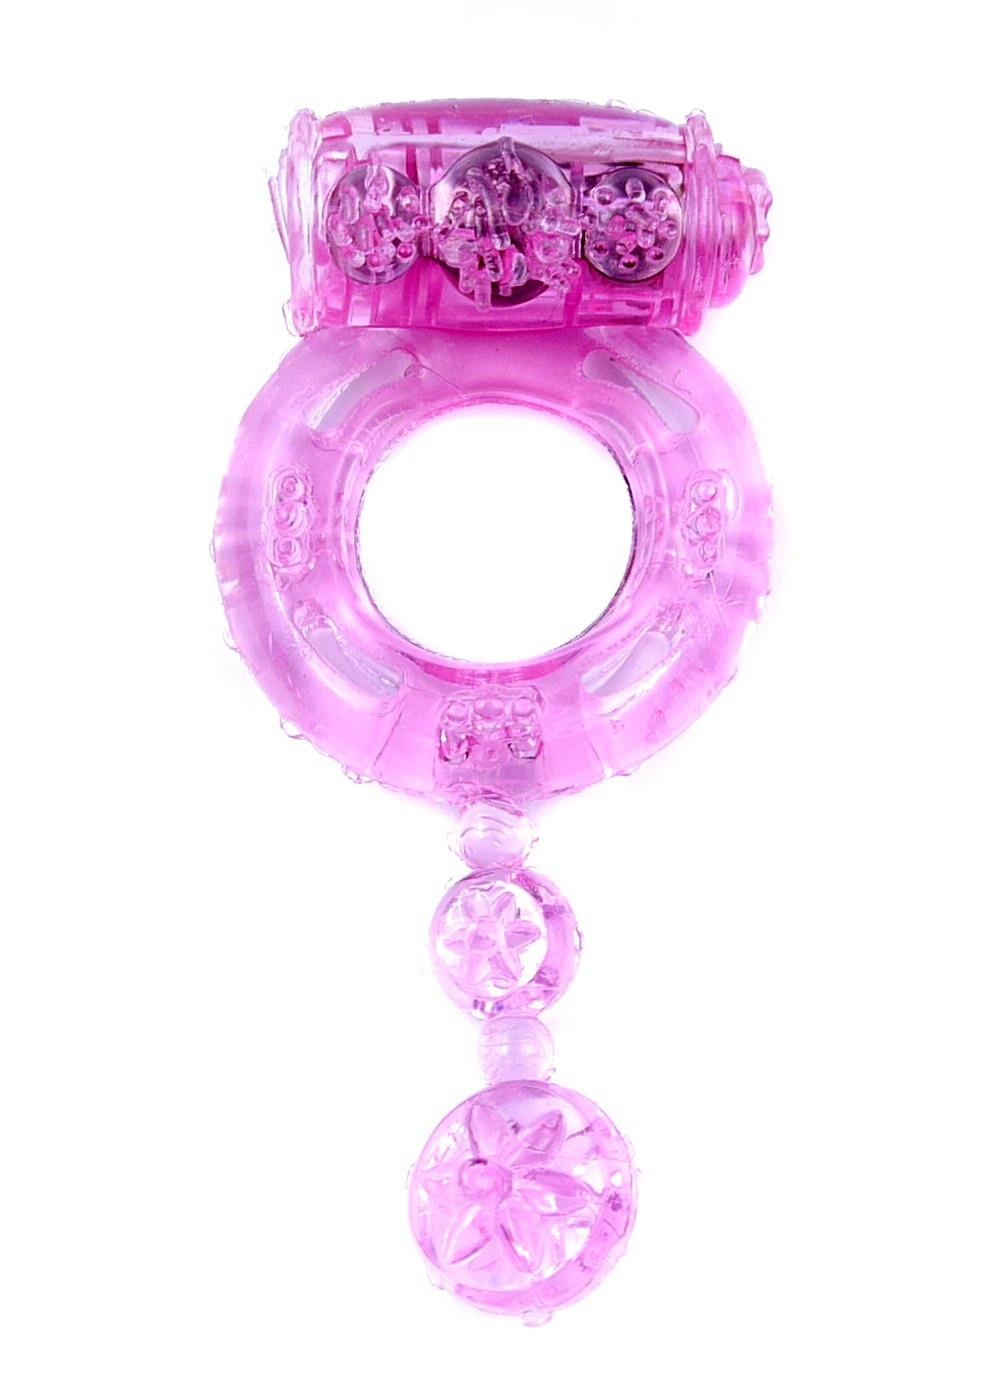 Bossoftoys - 67-00043 - Vibrating Cockring - Pink - batteries included - packed in plastic bag